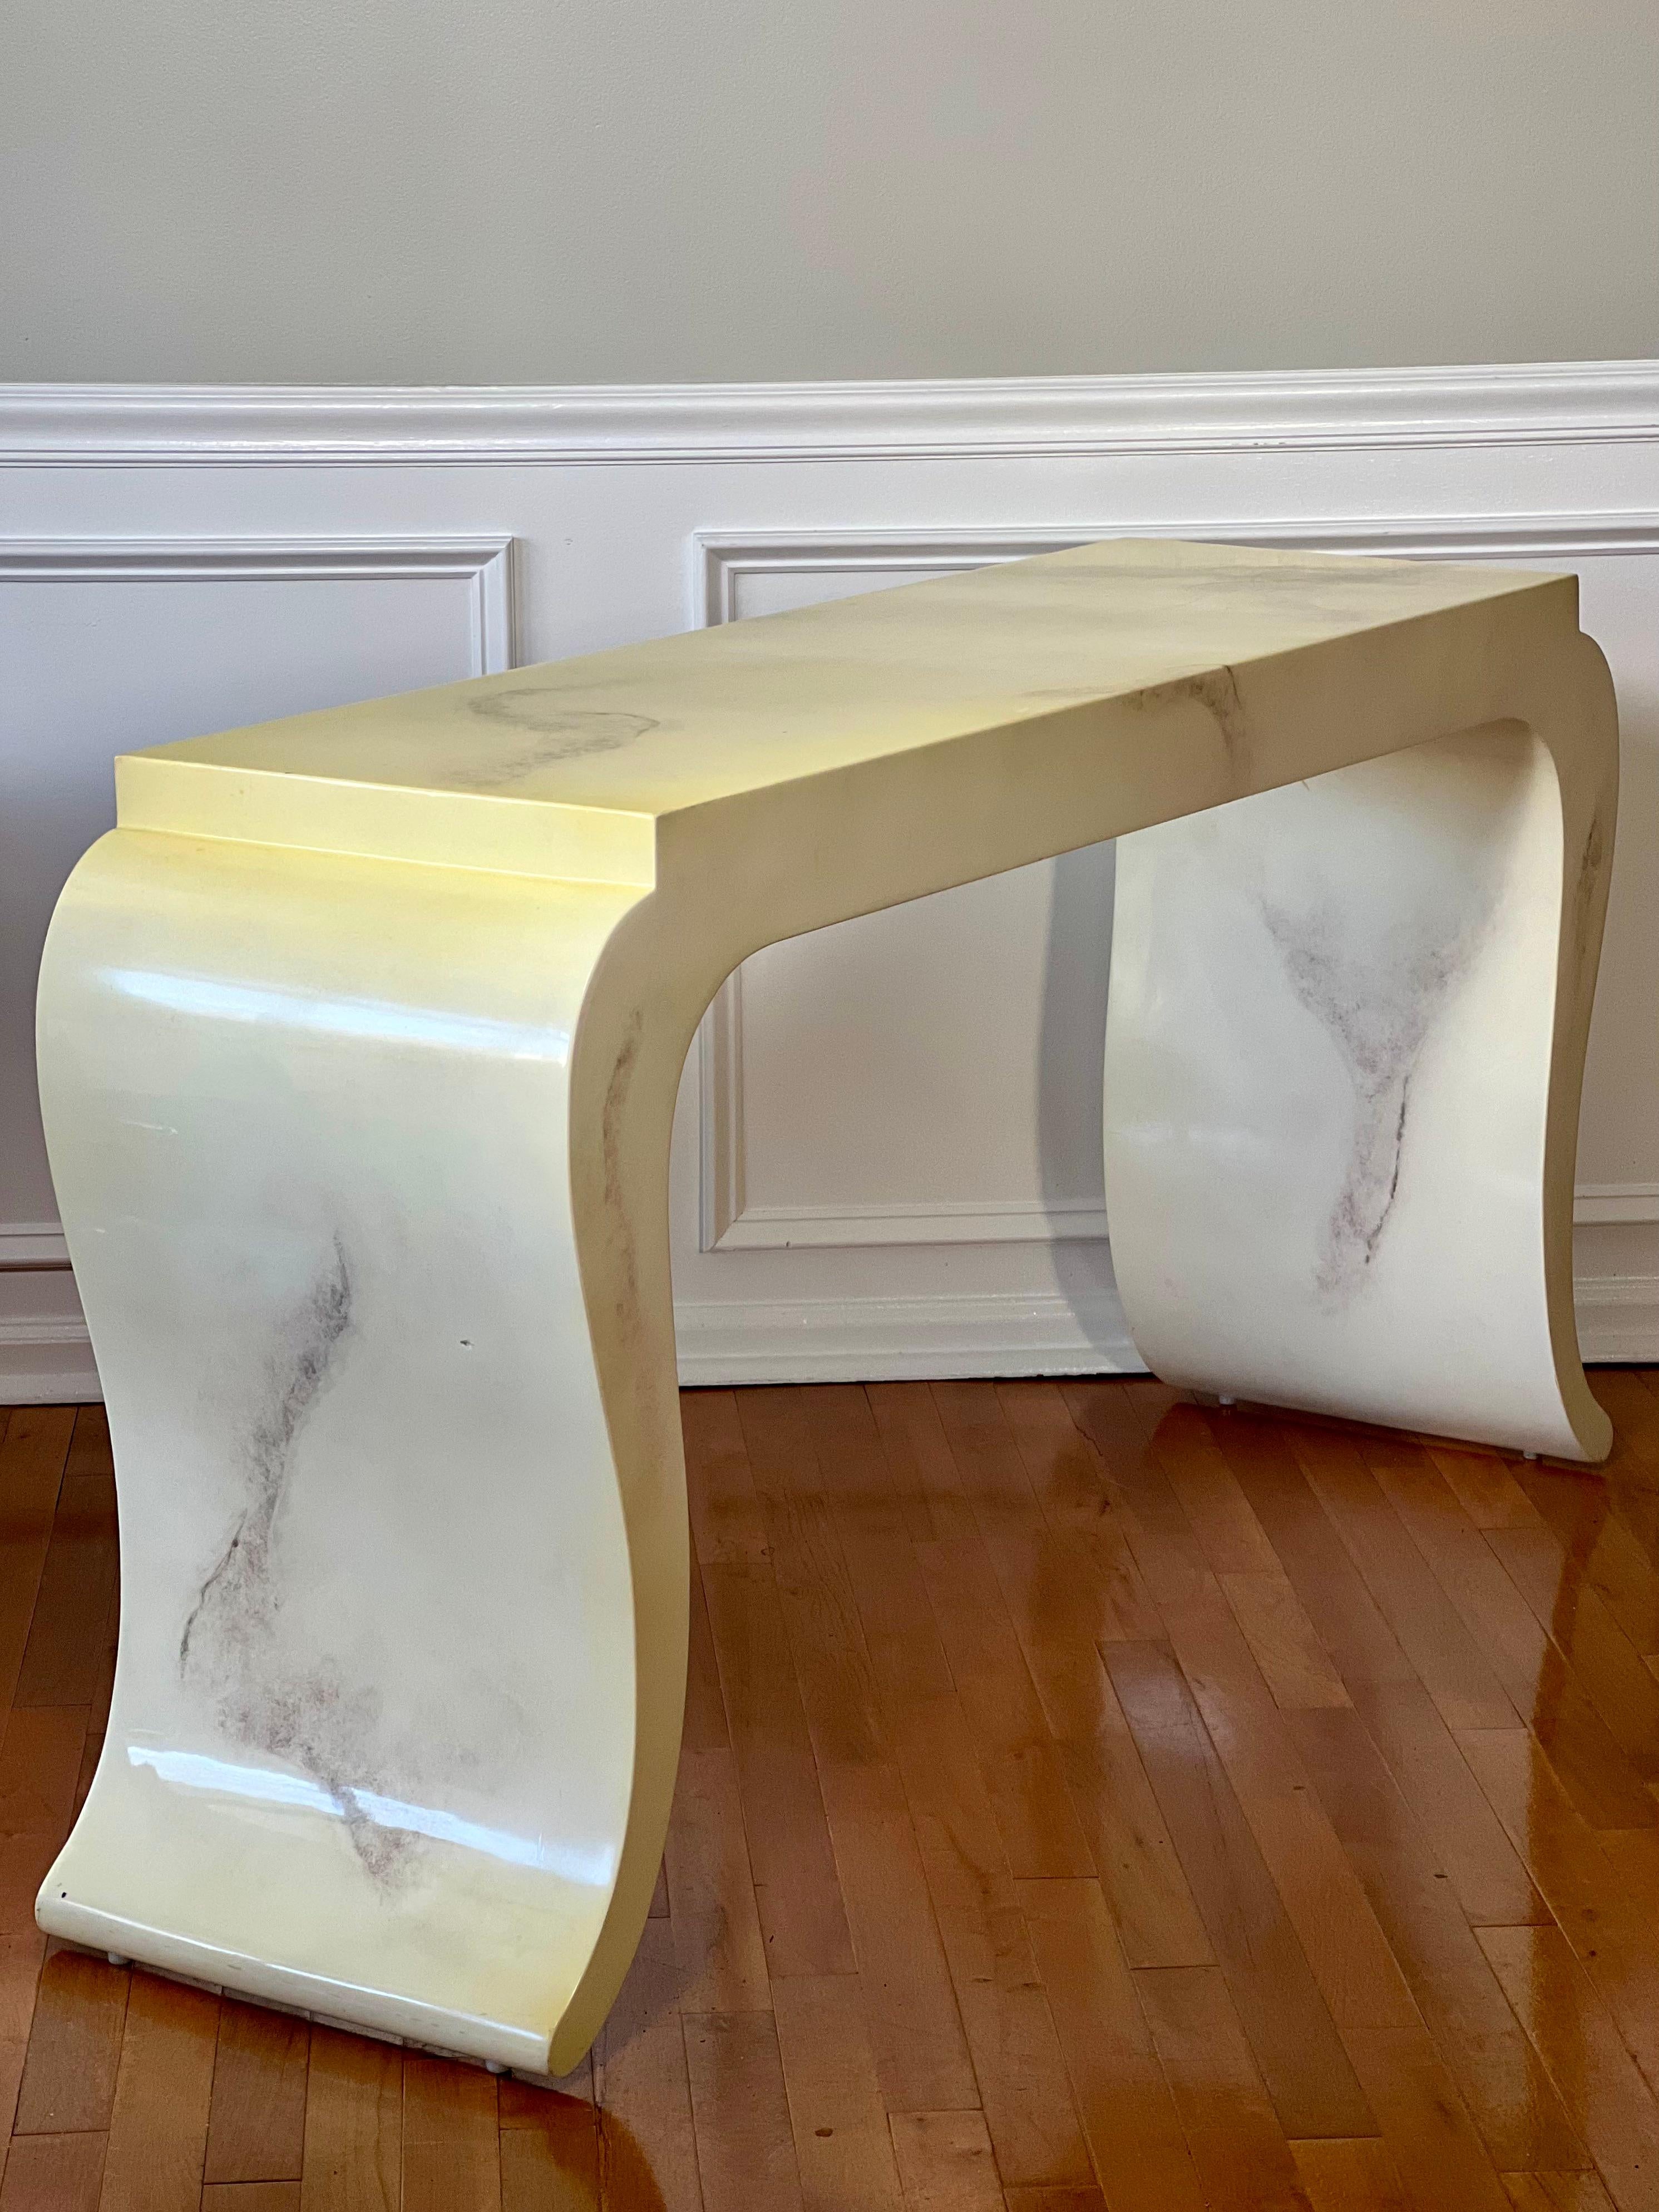 Elegant and curvaceous vintage console table in the manner of Karl Springer.

The table features a faux marble lacquer finish throughout in creamy white, gray and light brown depicting natural color variations found in real stone. A gorgeous table